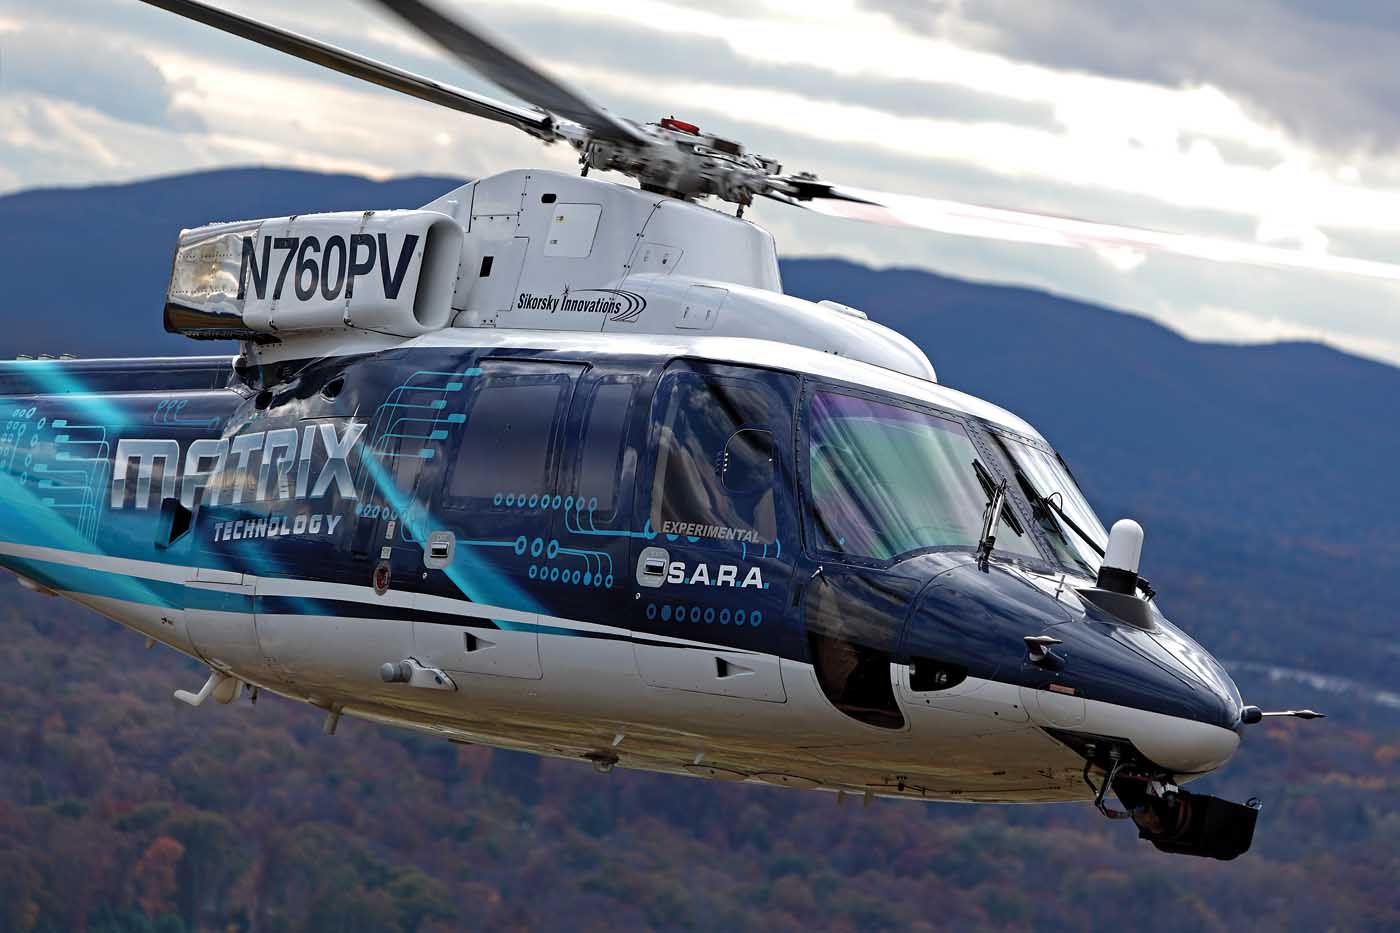 Sikorsky has been developing its Matrix Technology autonomy kit in SARA, an S-76 retrofitted with fly-by-wire flight controls. According to Sikorsky director of autonomous programs Igor Cherepinsky, the larger platform has been helpful in accommodating the supercomputer in the back of the aircraft: “We’re not limited by payload or power, we can experiment all we want.” Ted Carlson Photo